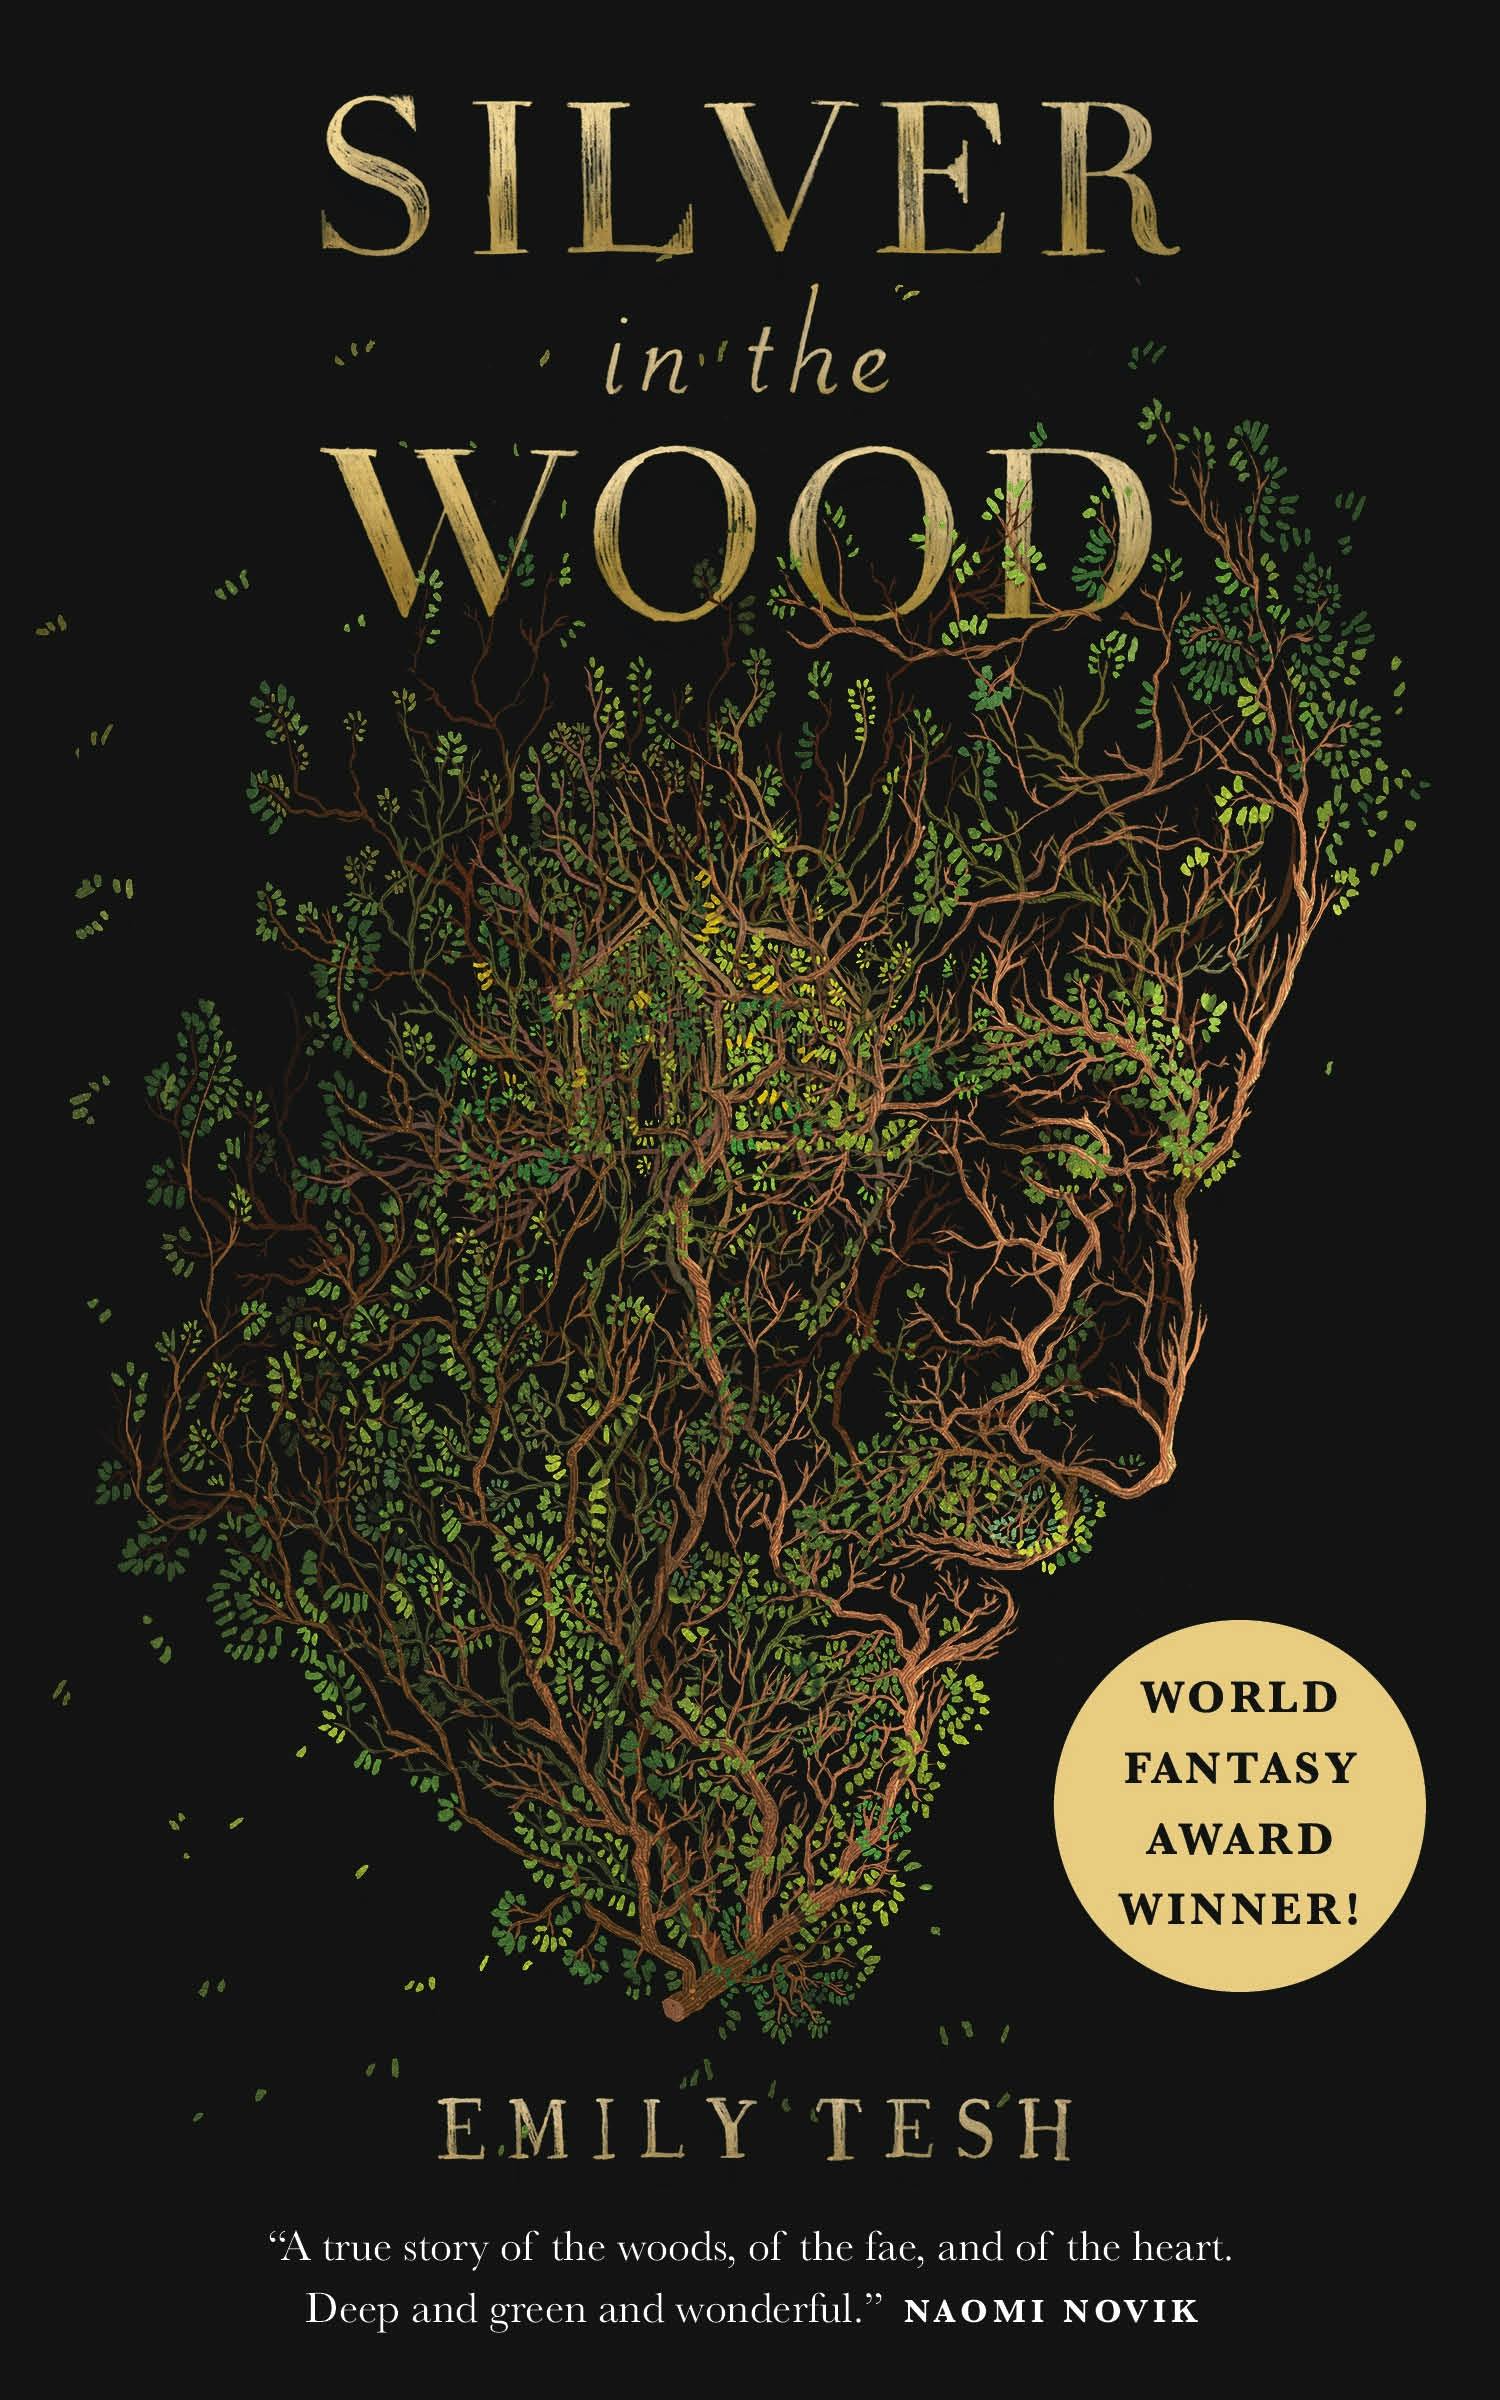 Cover for the book titled as: Silver in the Wood